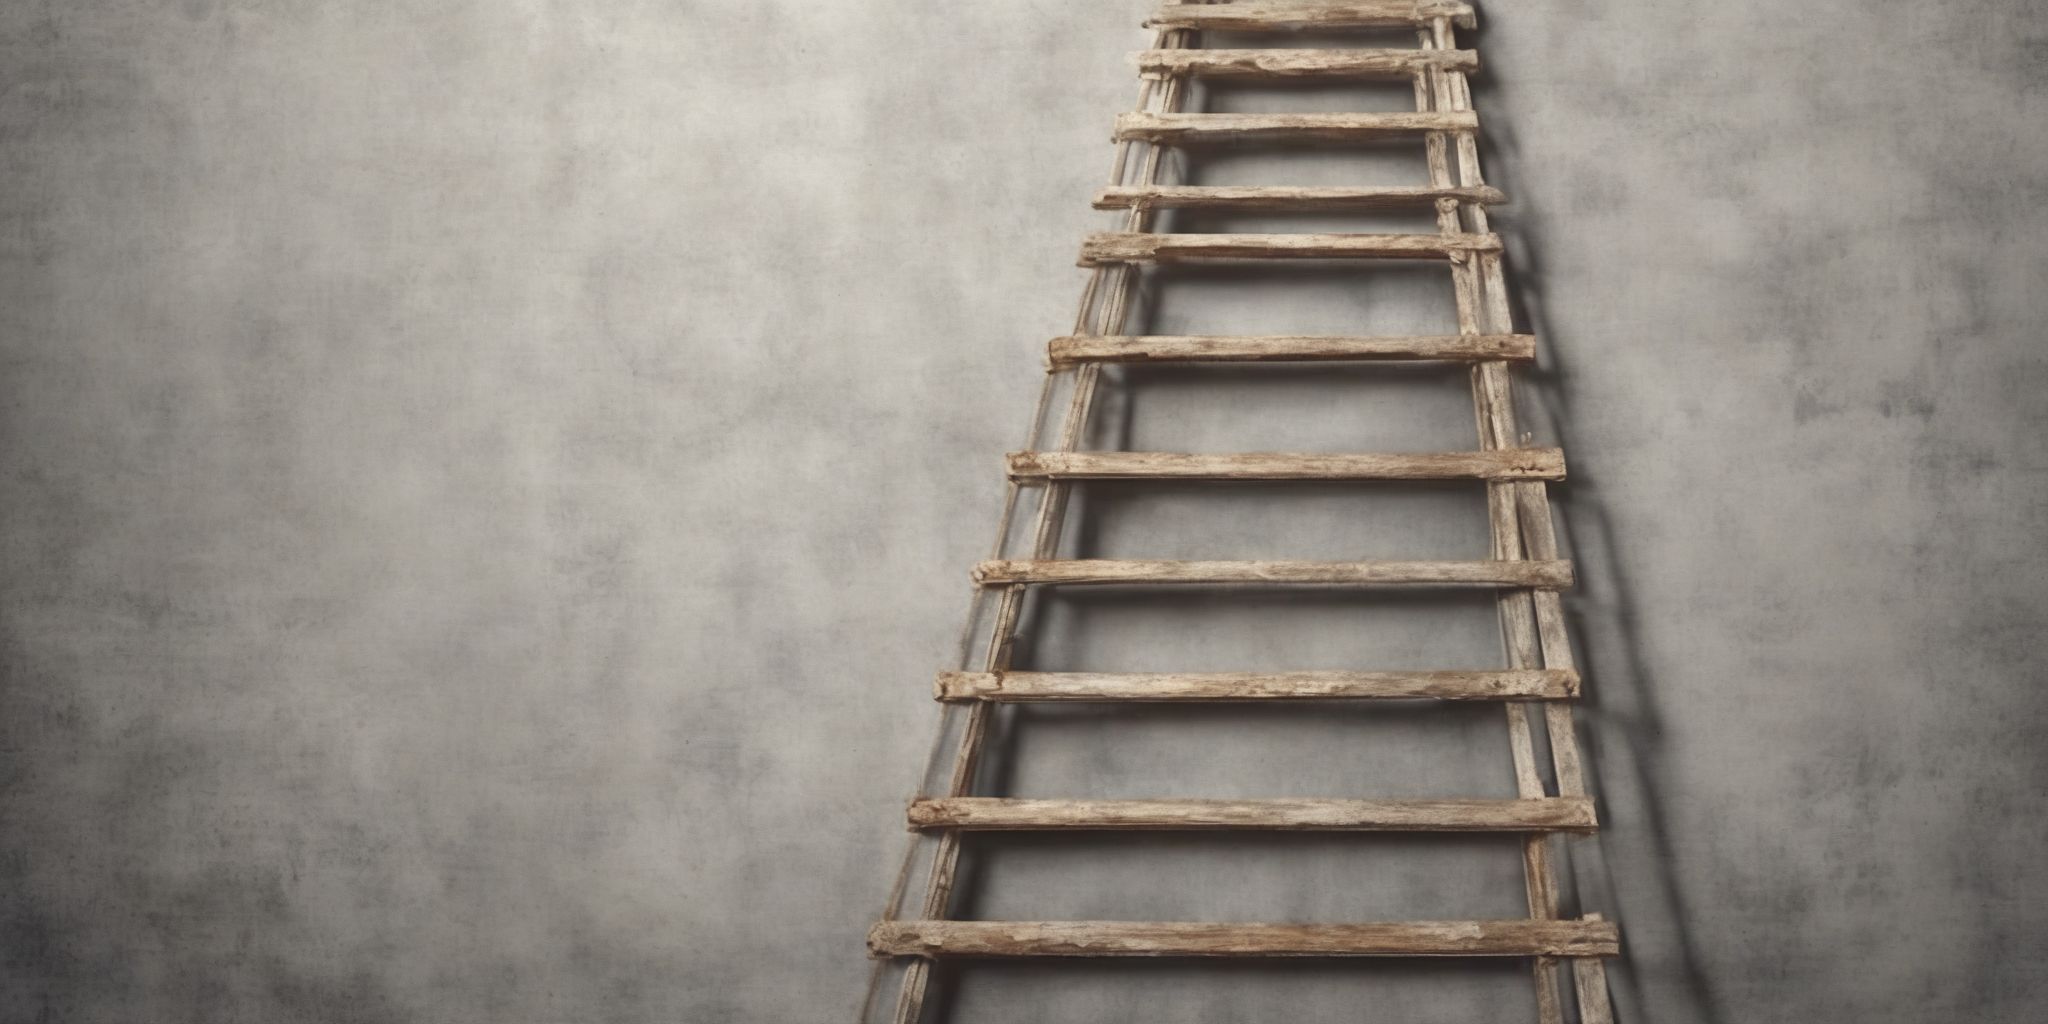 Investment ladder  in realistic, photographic style